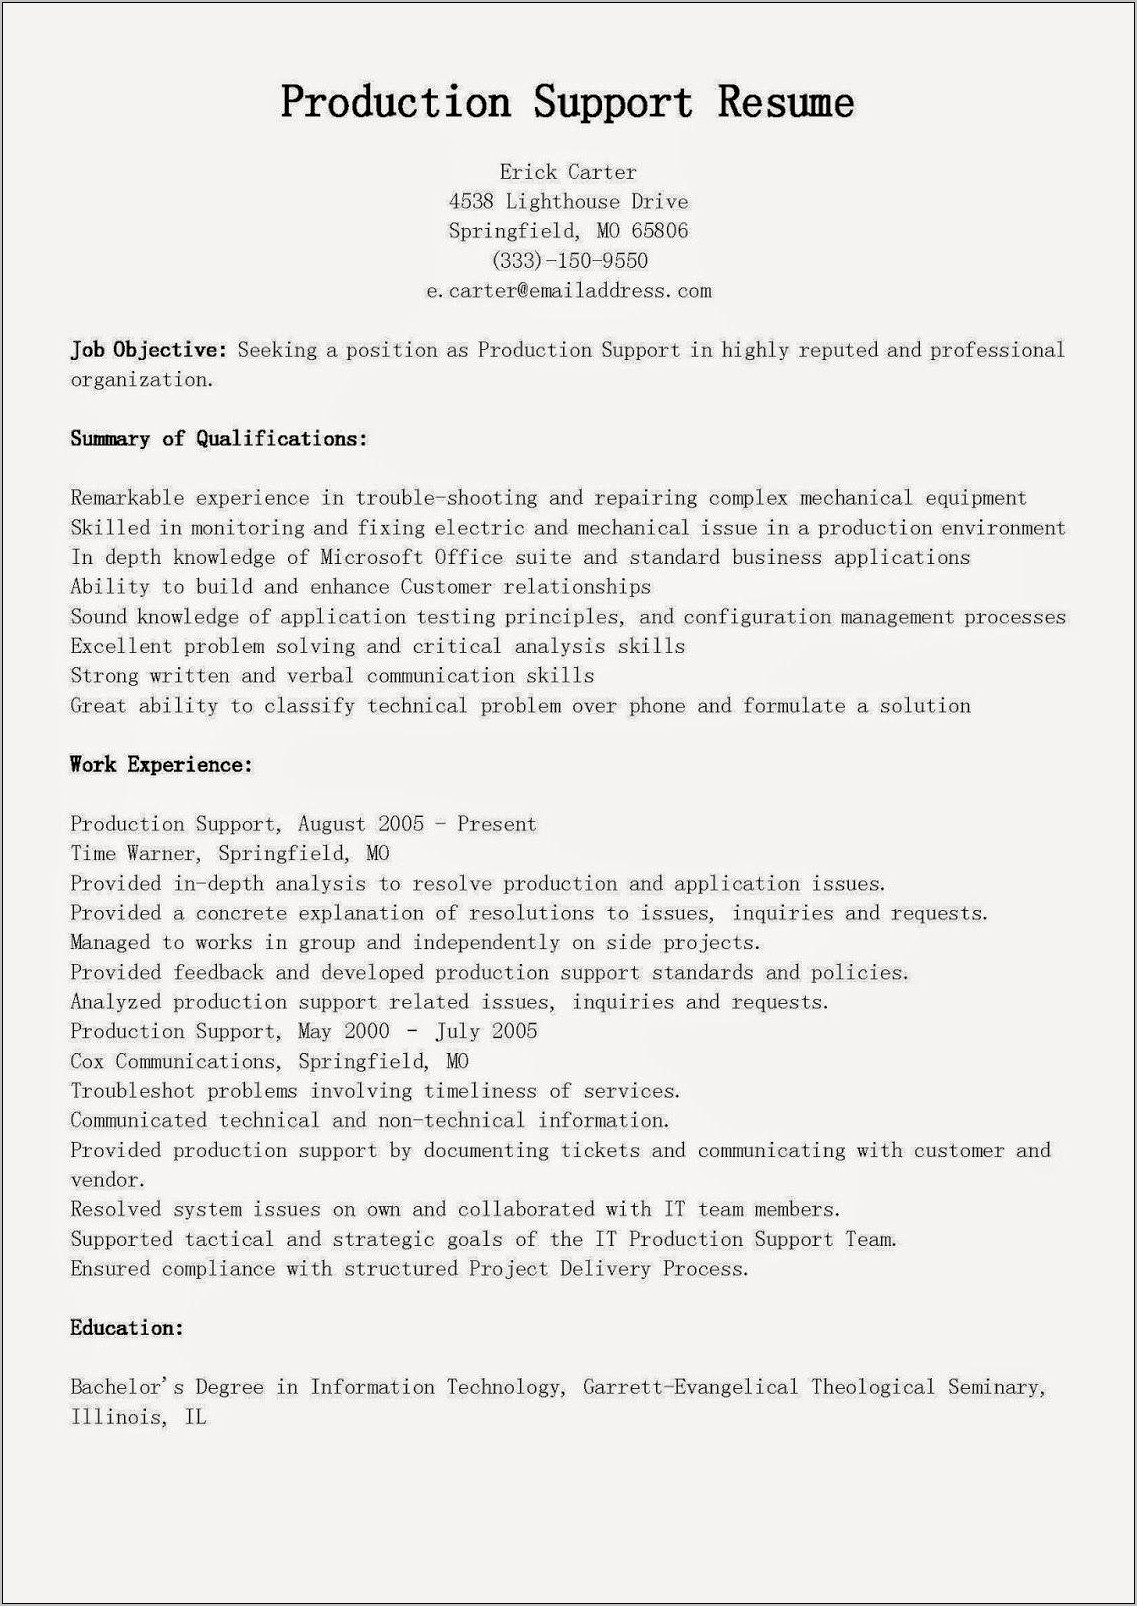 Sample Resume Of Application Support